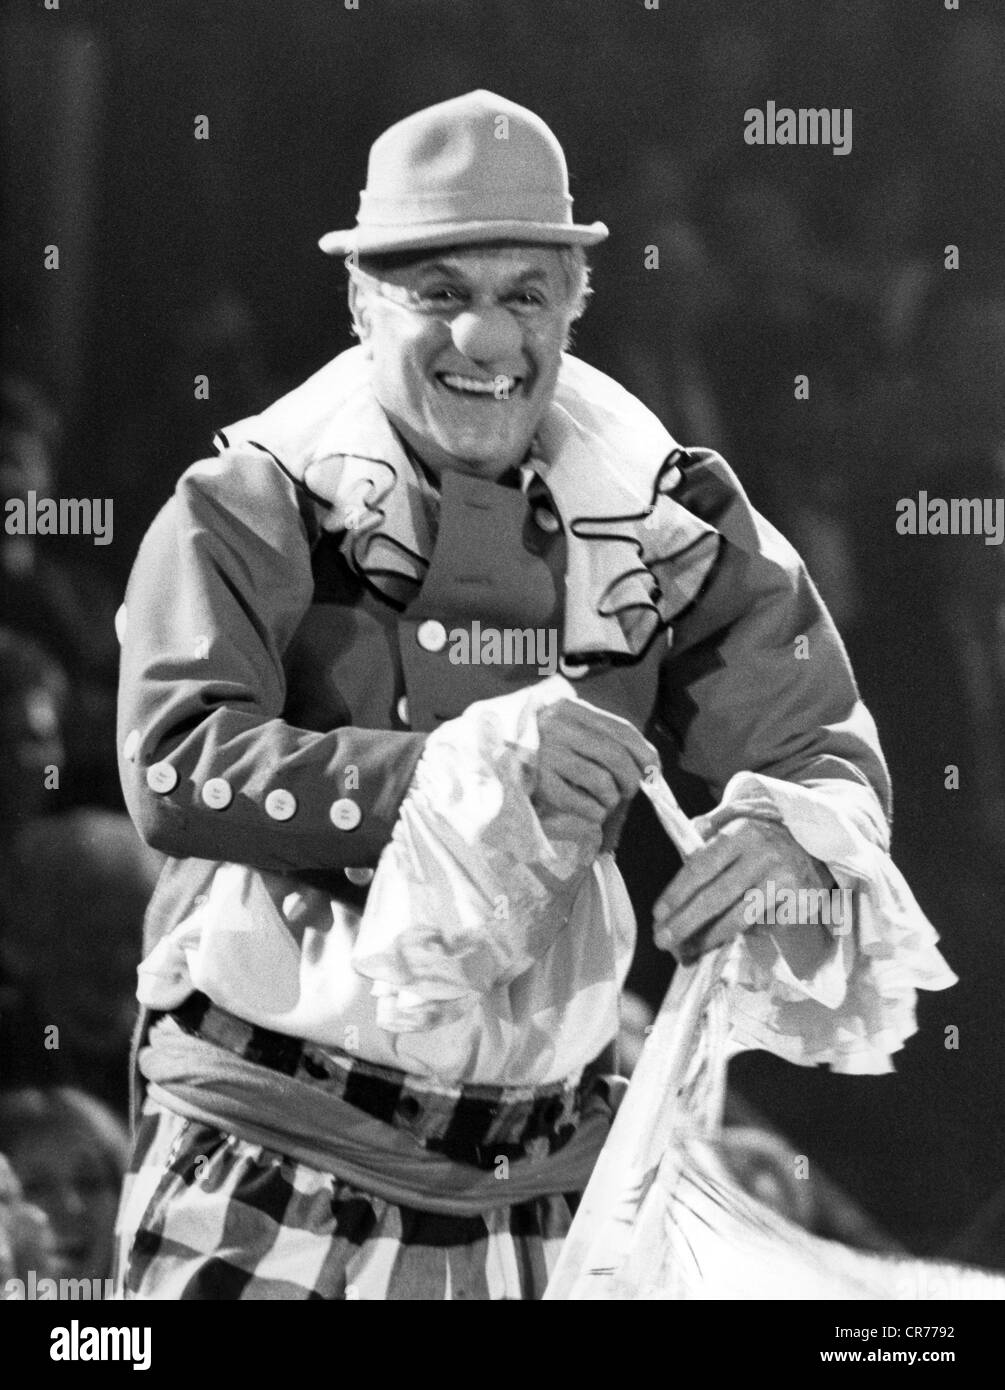 Curtis, Tony, 3.6.1925 - 29.9.2010, US American actor, half length, as clown in the charity show 'Stars in der Manege' (Stars in the arena), Circus Krone, Munich, Germany, December 1985, Stock Photo